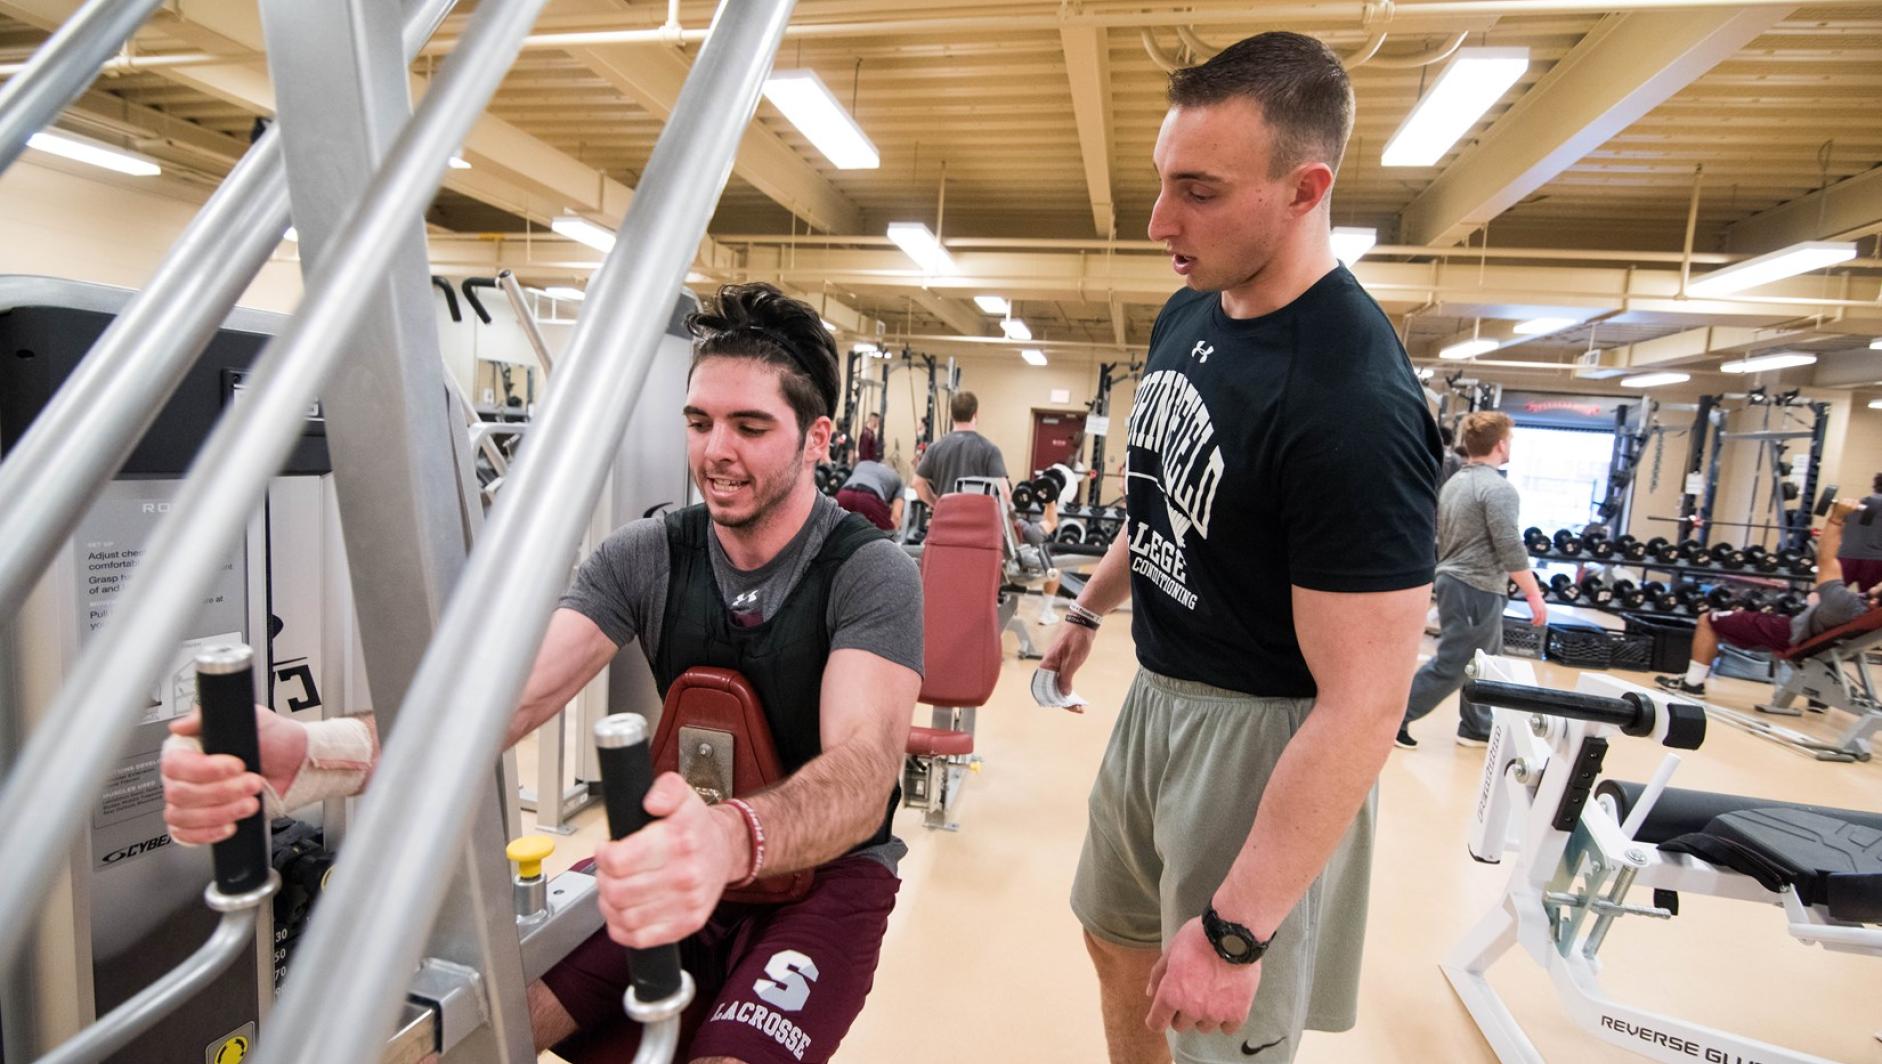 A student strength and conditioning coach looks on as his client used a piece of workout equipment.